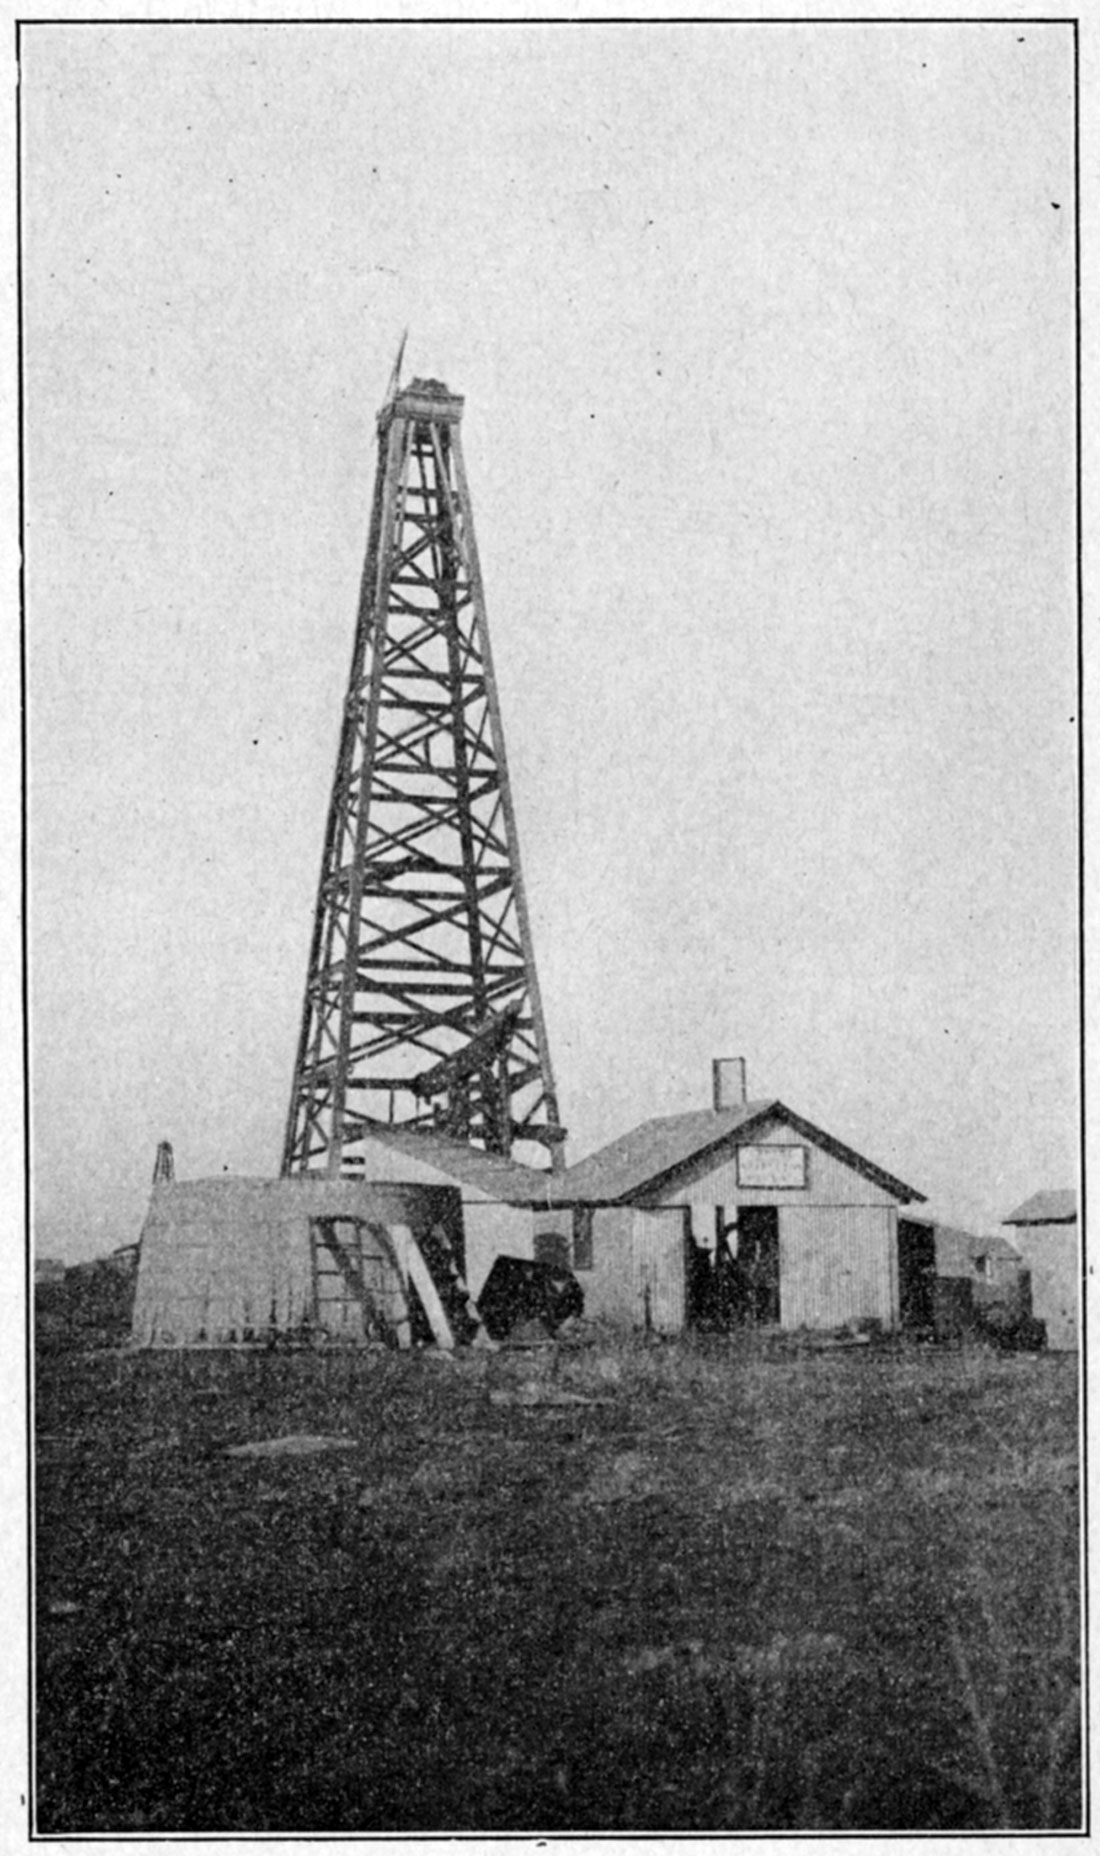 Stapleton well No. 1, the discovery well of the Eldorado field.